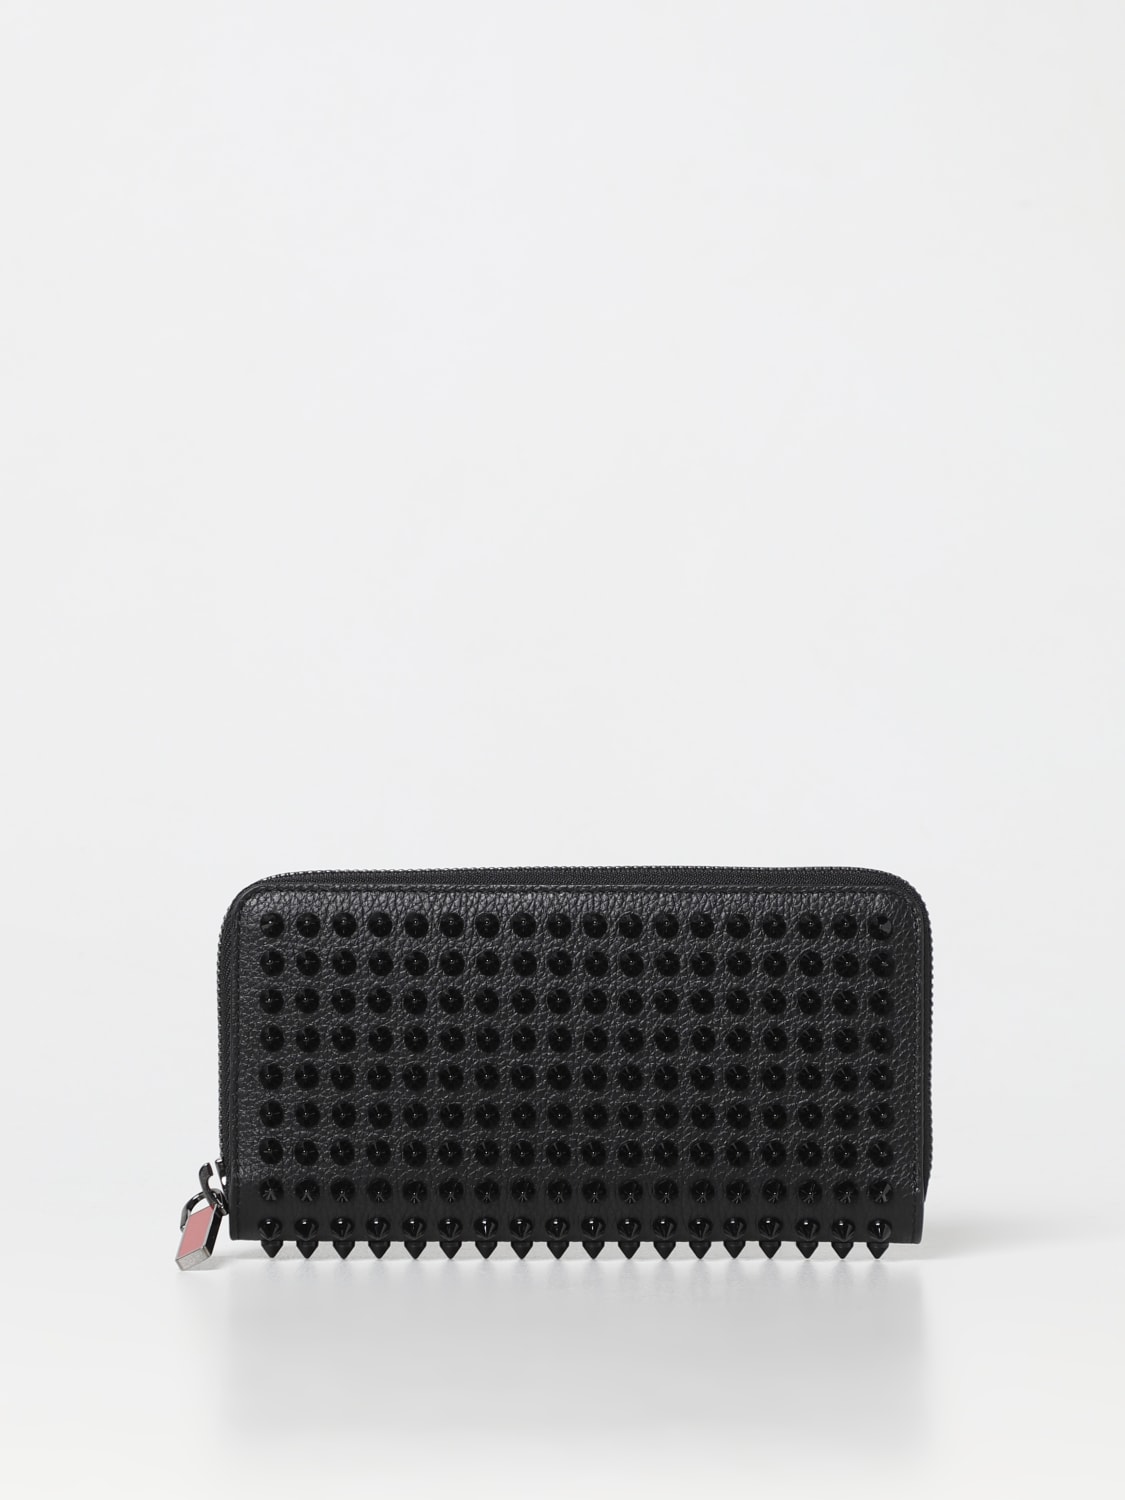 LOUBOUTIN: Panettone Spike in grained leather - Black | Christian Louboutin wallet 1165044 on GIGLIO.COM